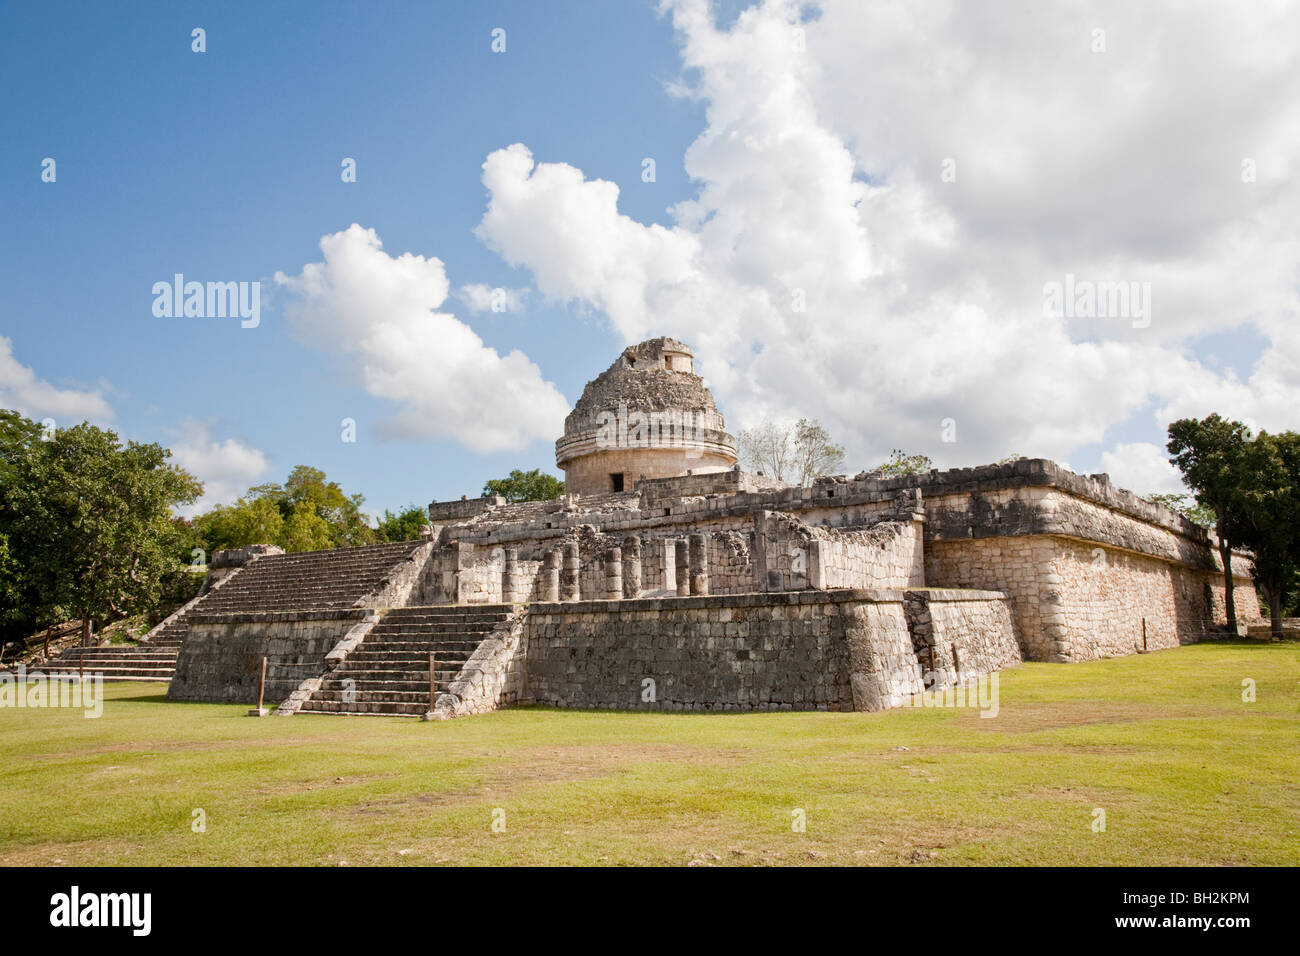 The Observatory or Shell Tower. Chichen Itza Archaeological Site Yucatan Mexico. Stock Photo